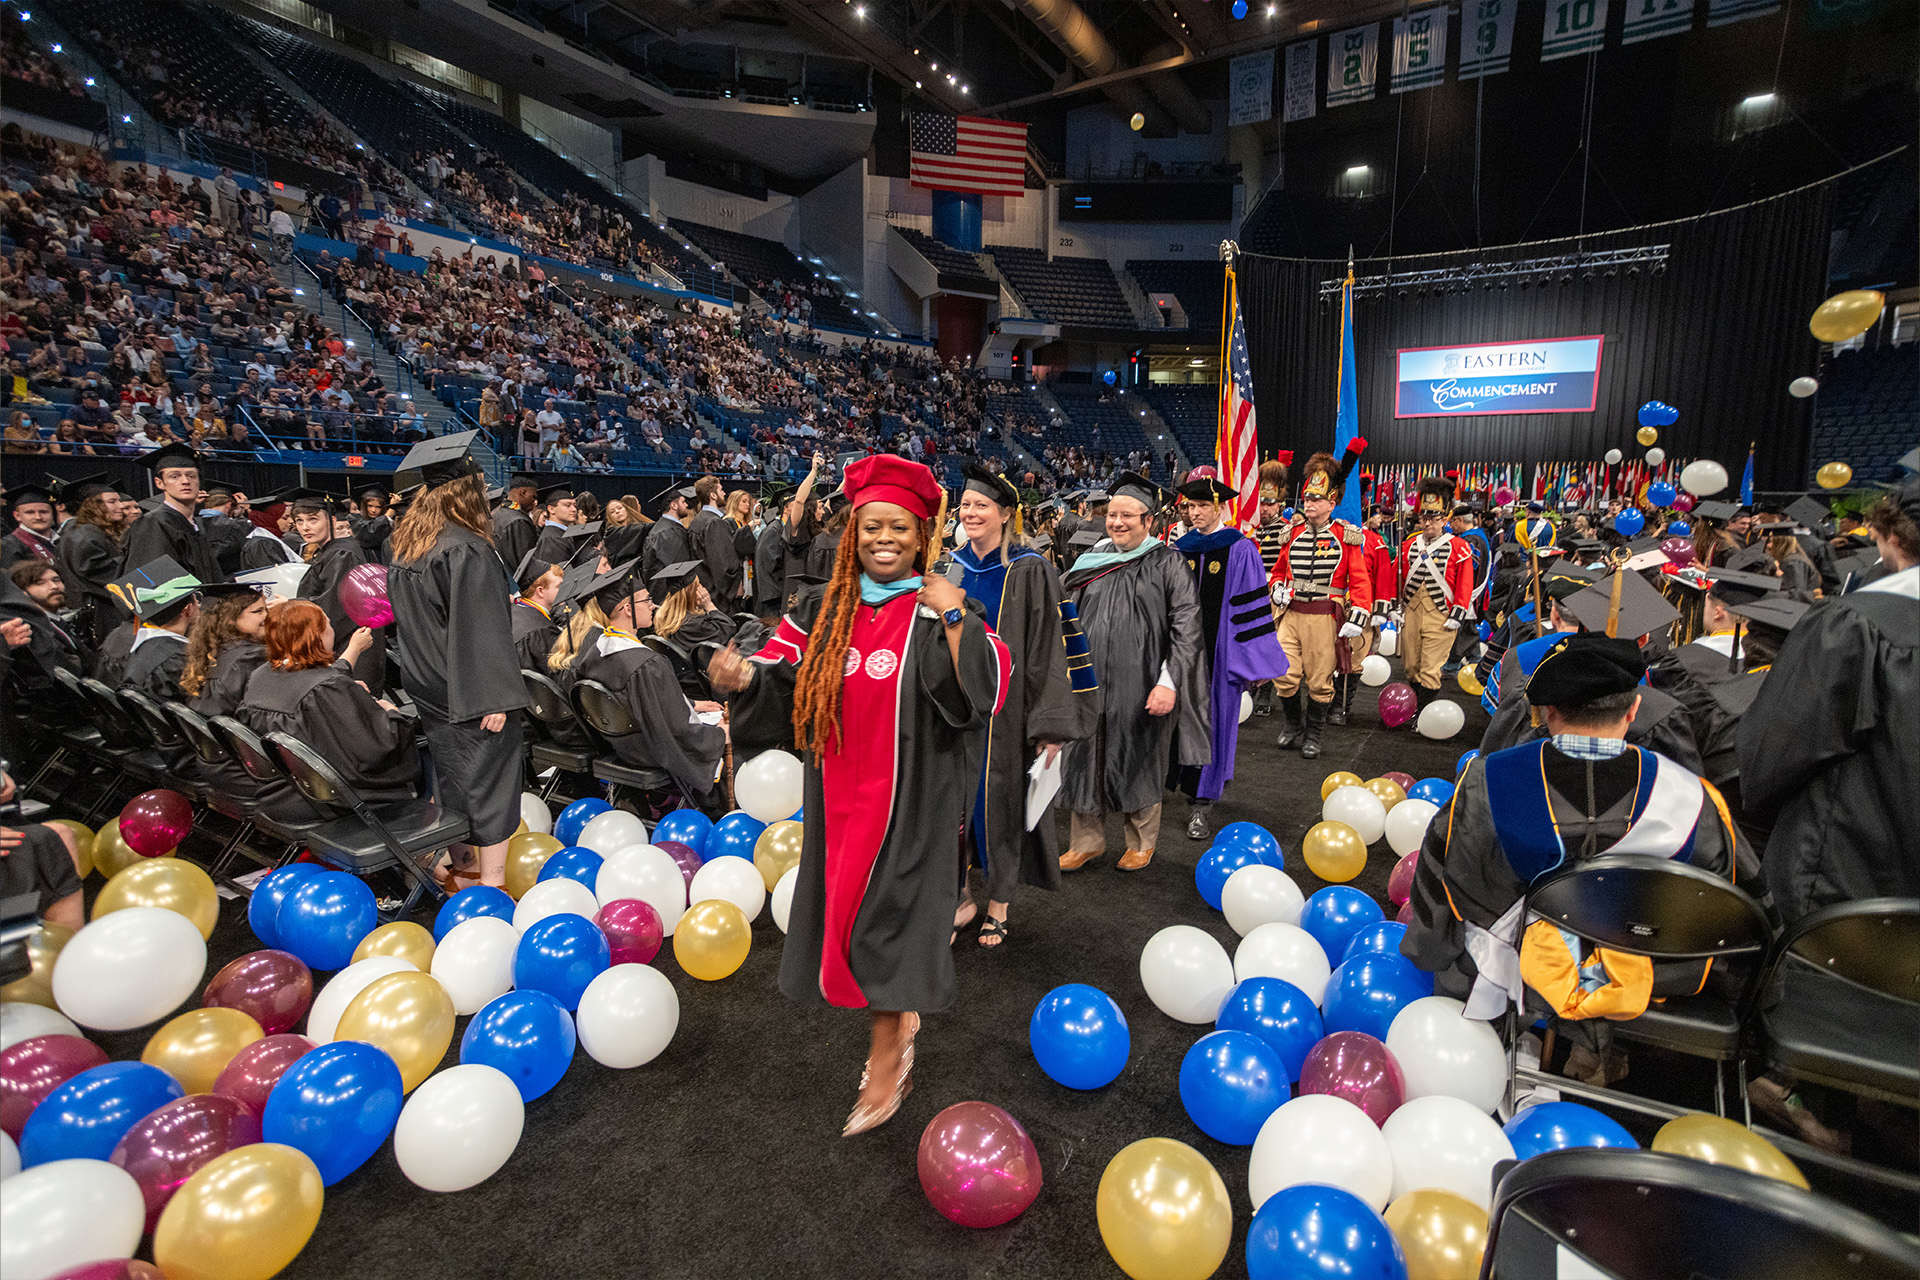 Professors walking down the aisle through colorful balloons as Commencement ends